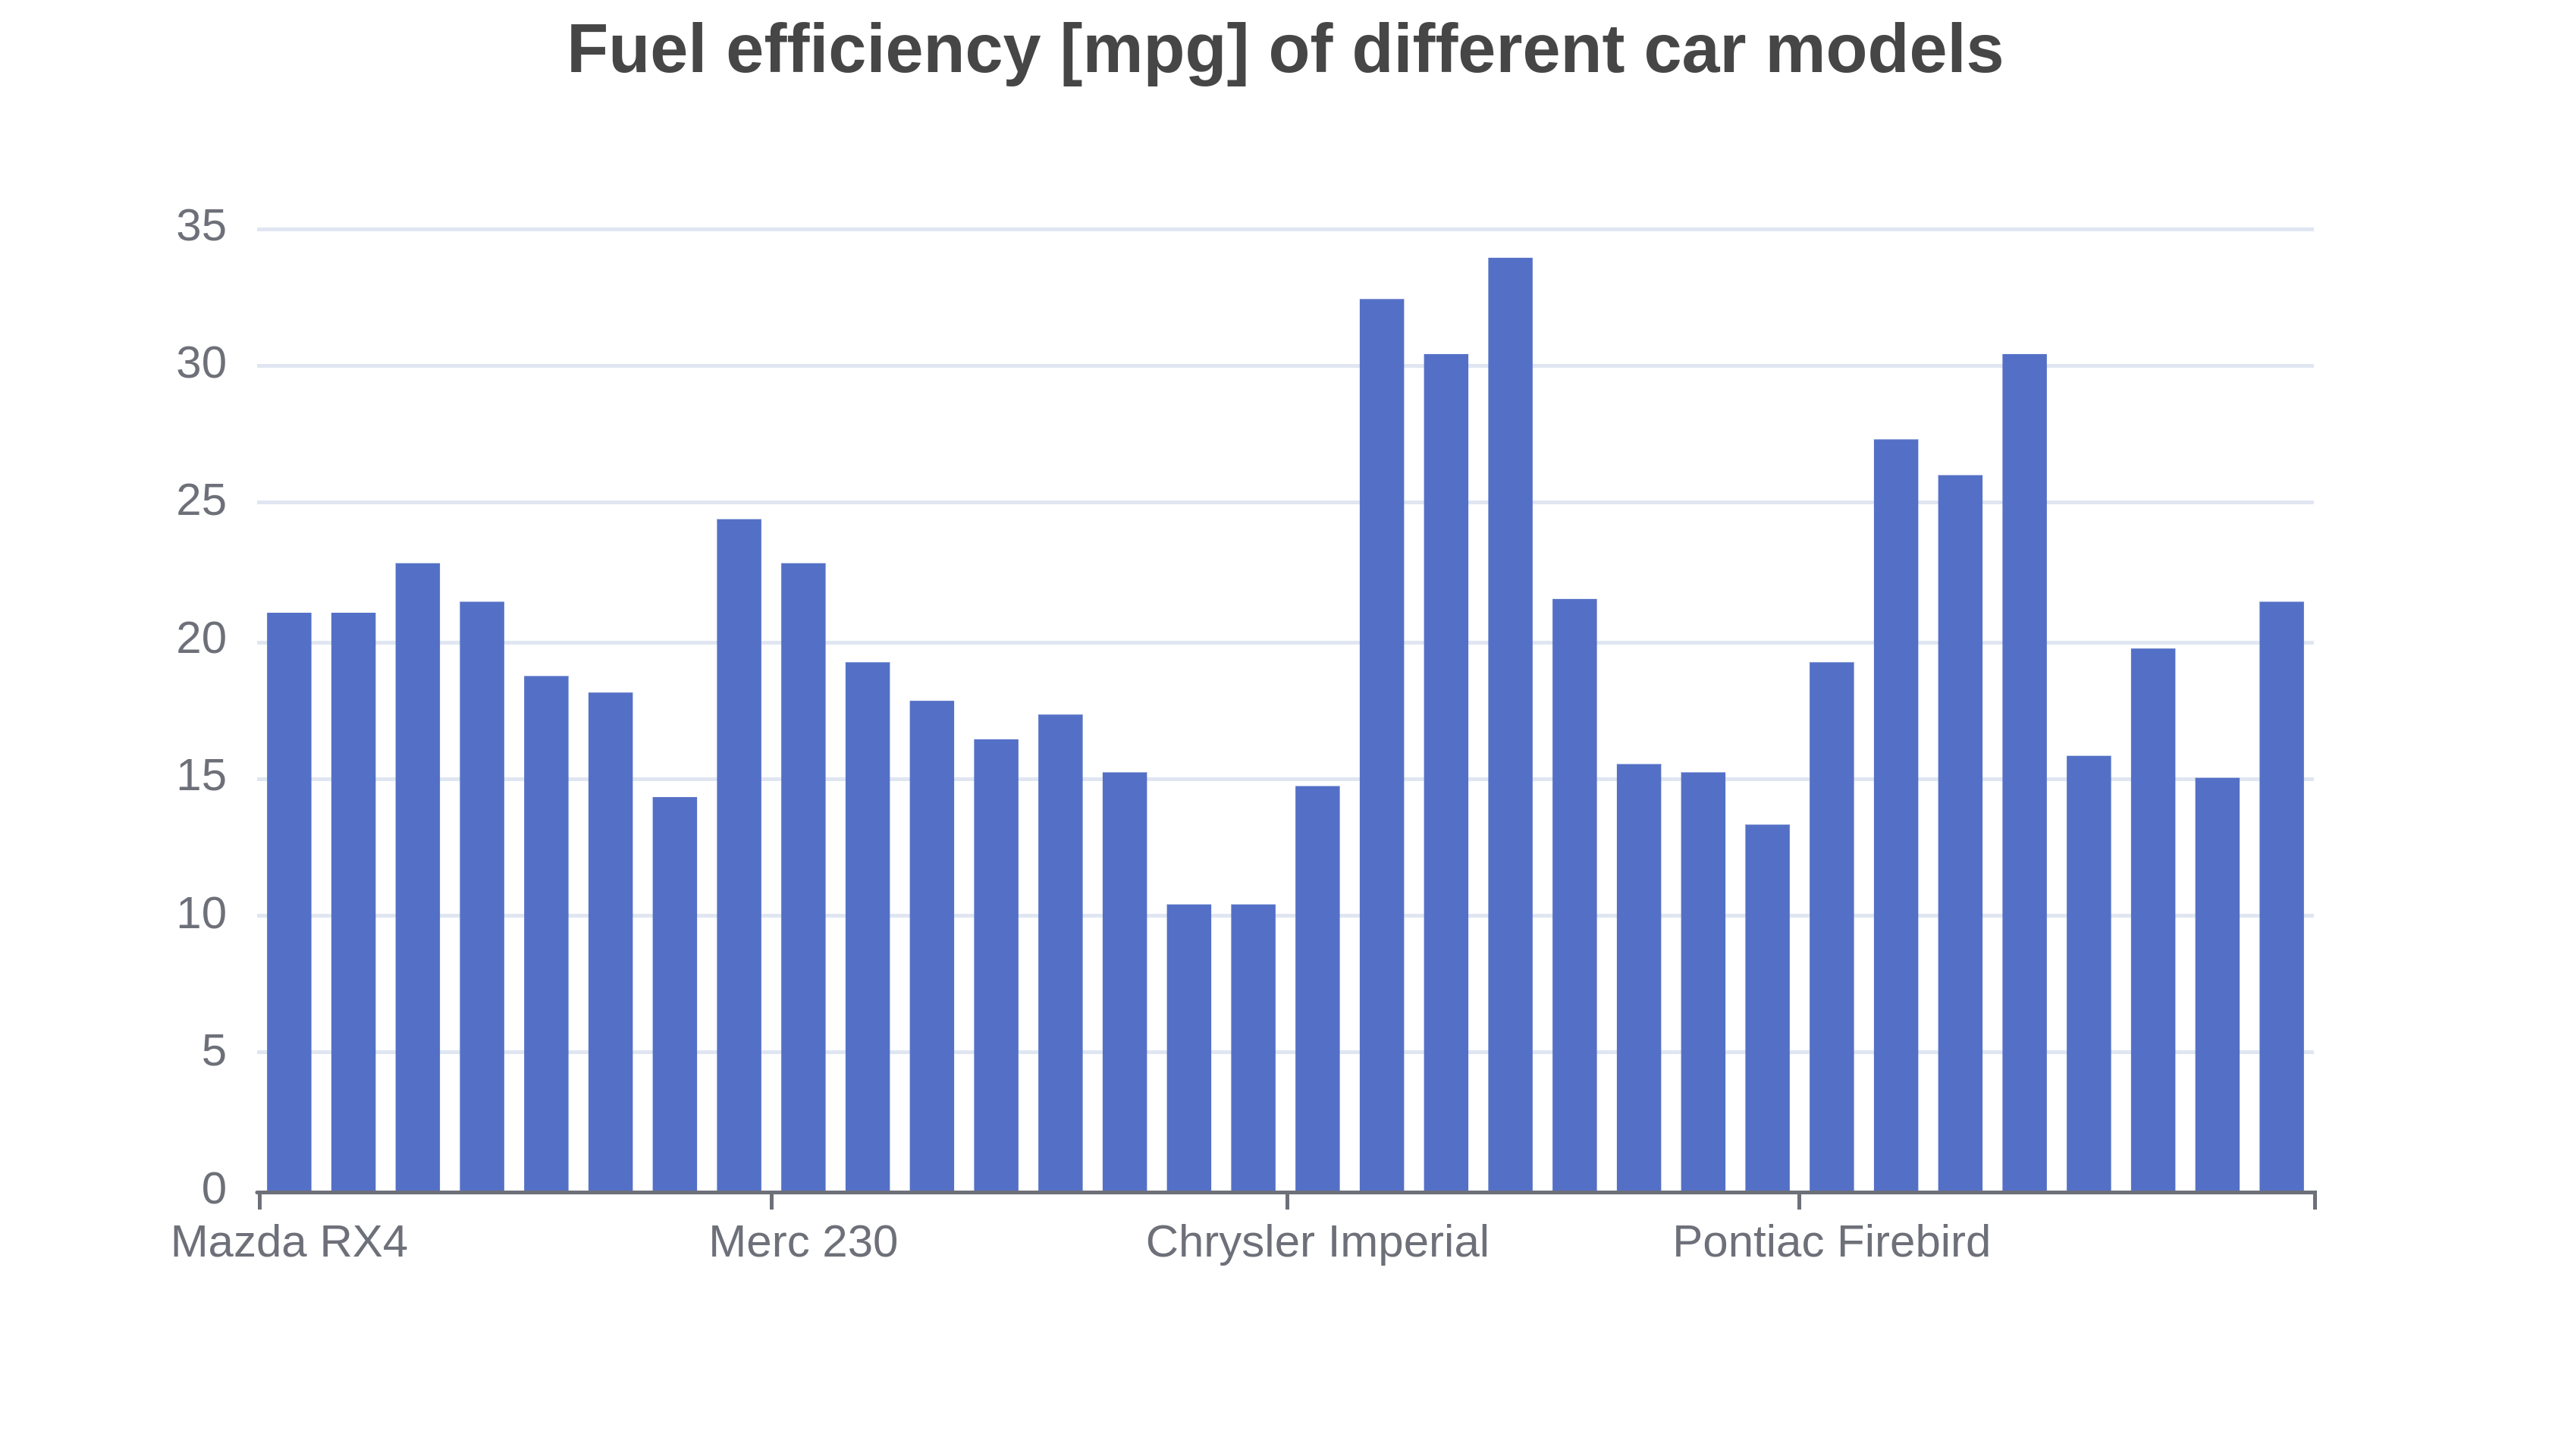 Bar graph showing fuel efficiency of different car models in the mtcars data set